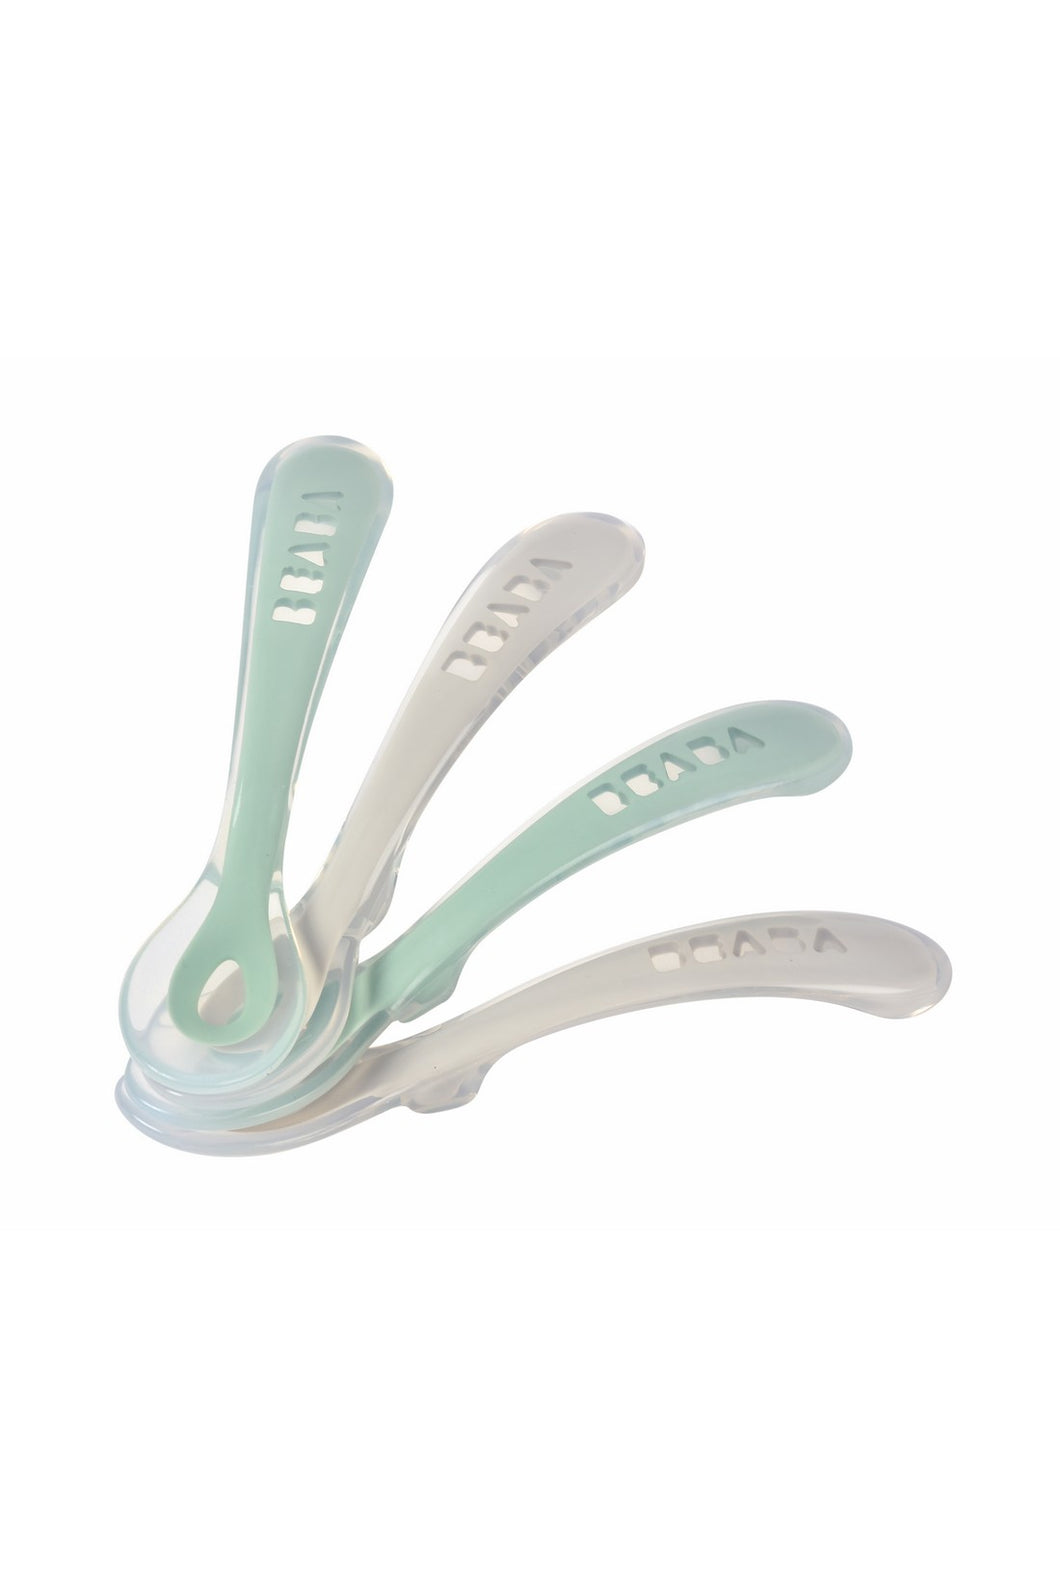 Beaba Set of 4 2nd Age Soft Silicone Spoons - Green 1